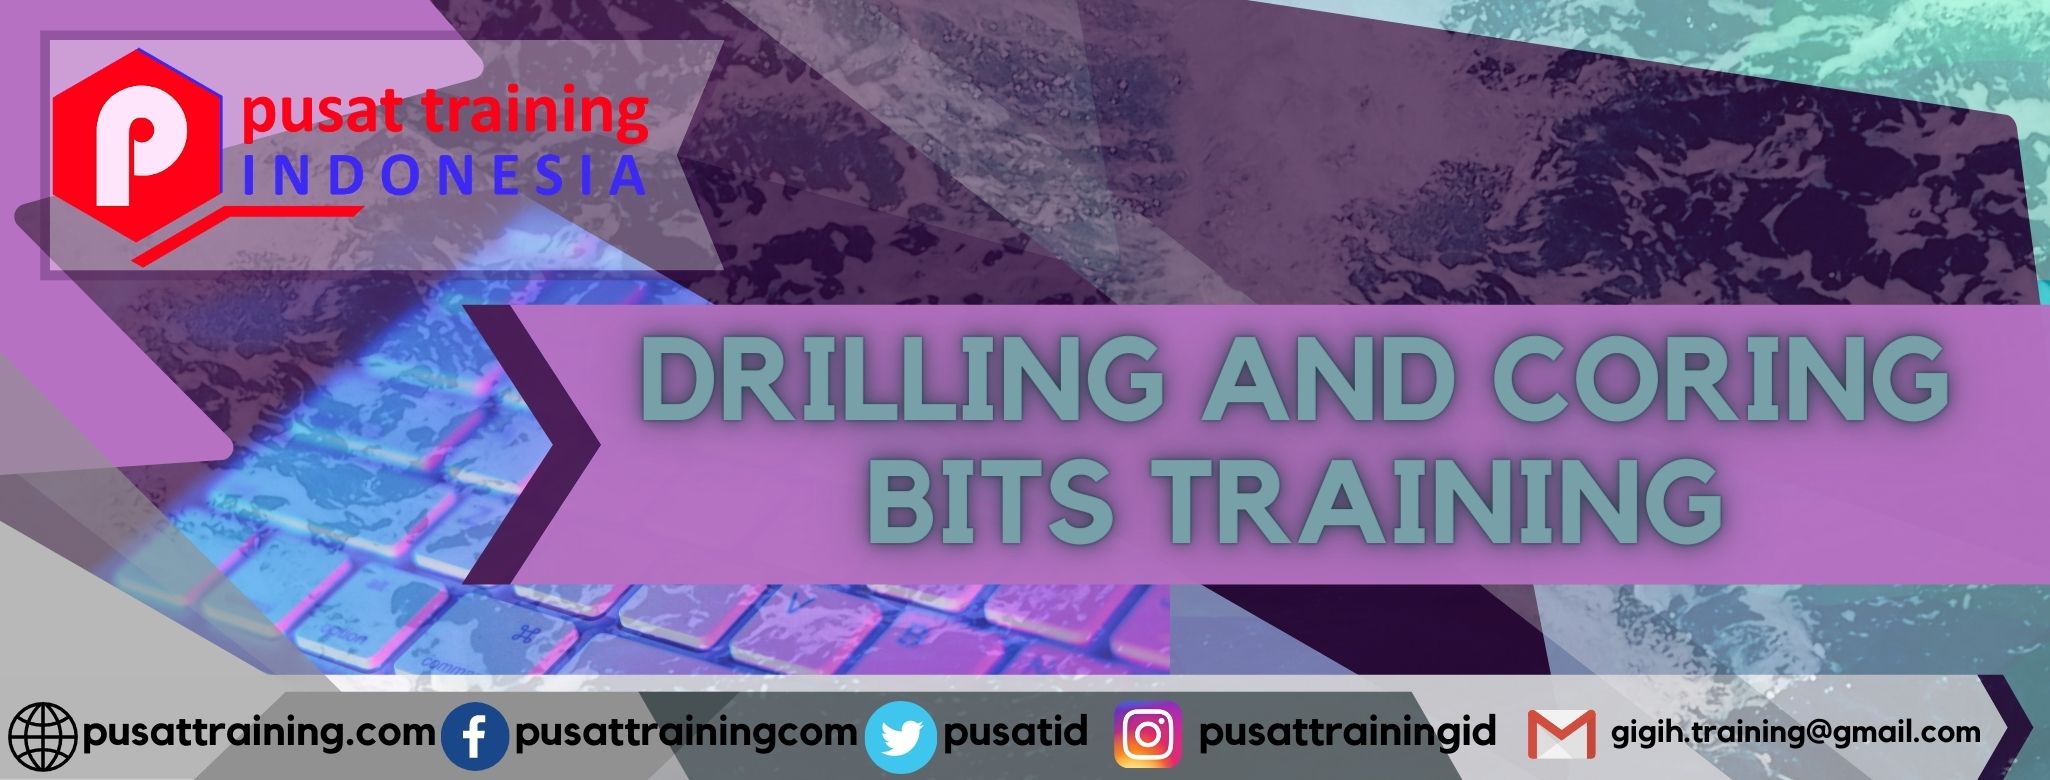 DRILLING AND CORING BITS TRAINING 